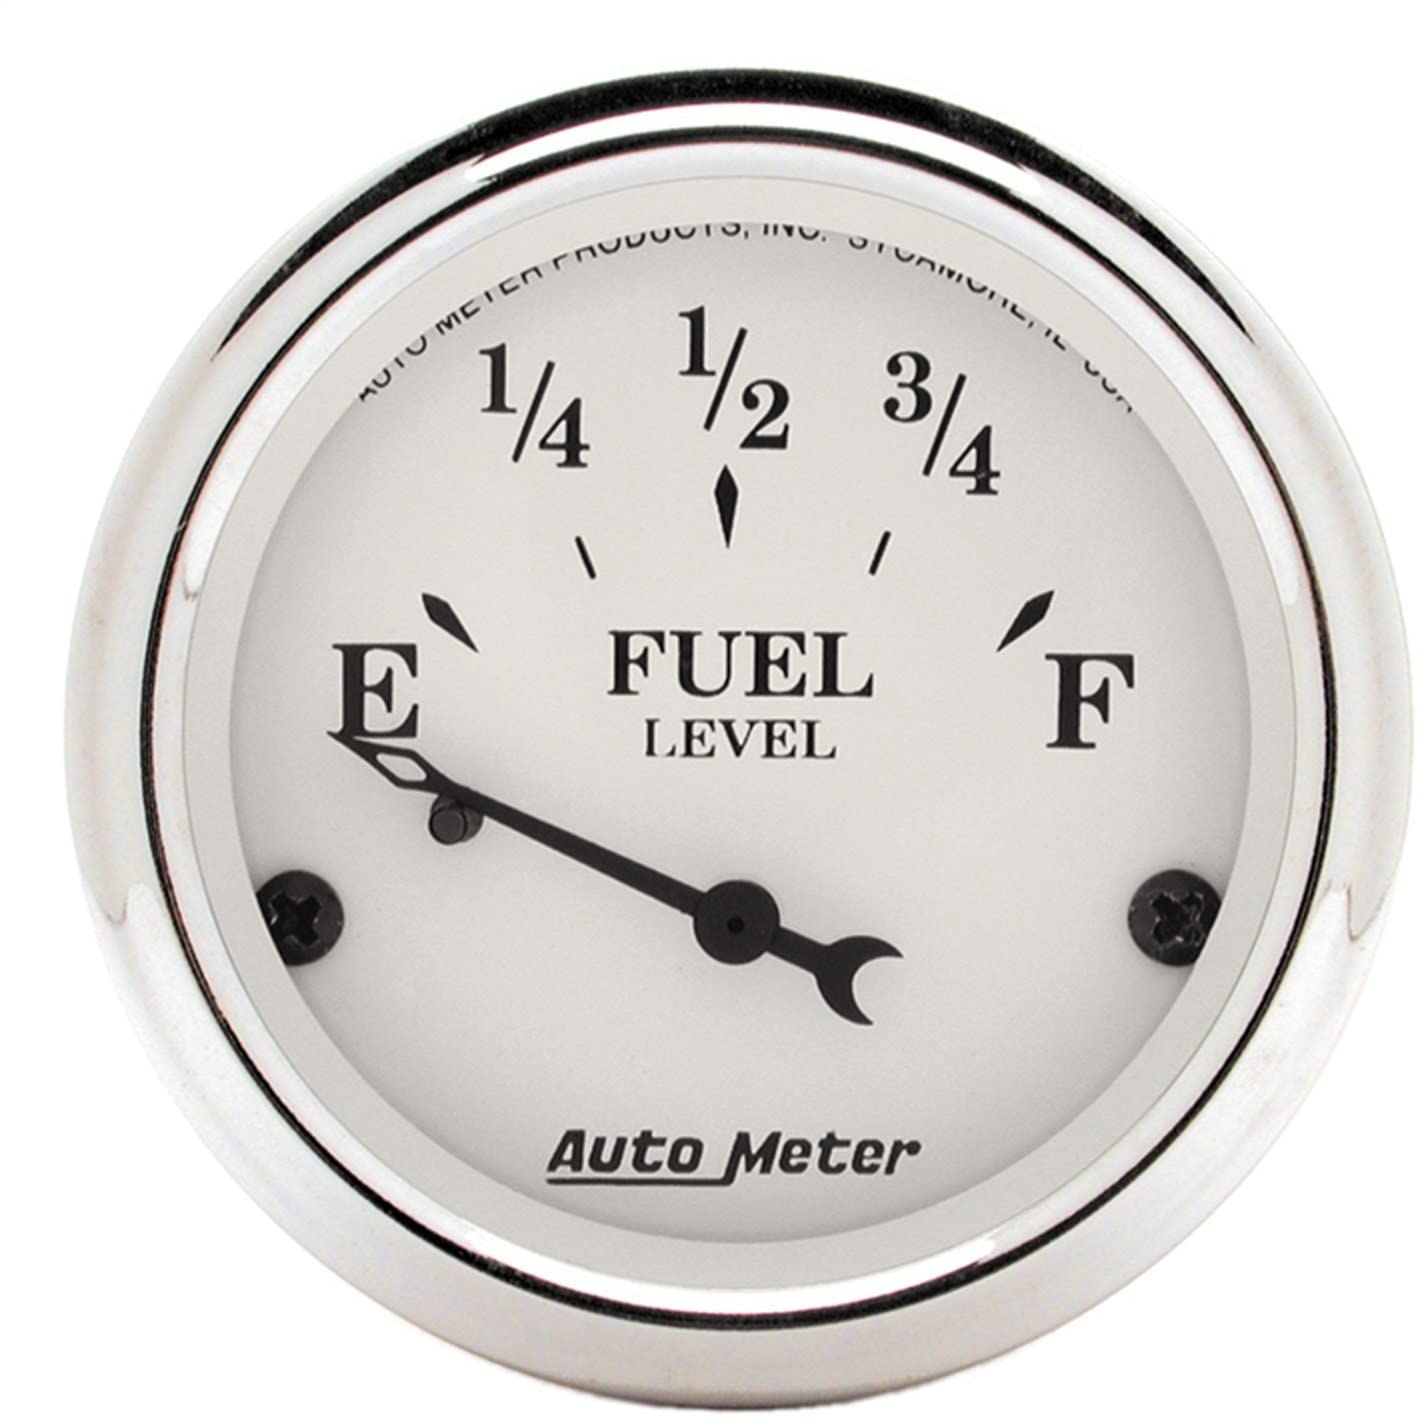 AUTO METER 1605 Old TYME White Fuel Level Gauge